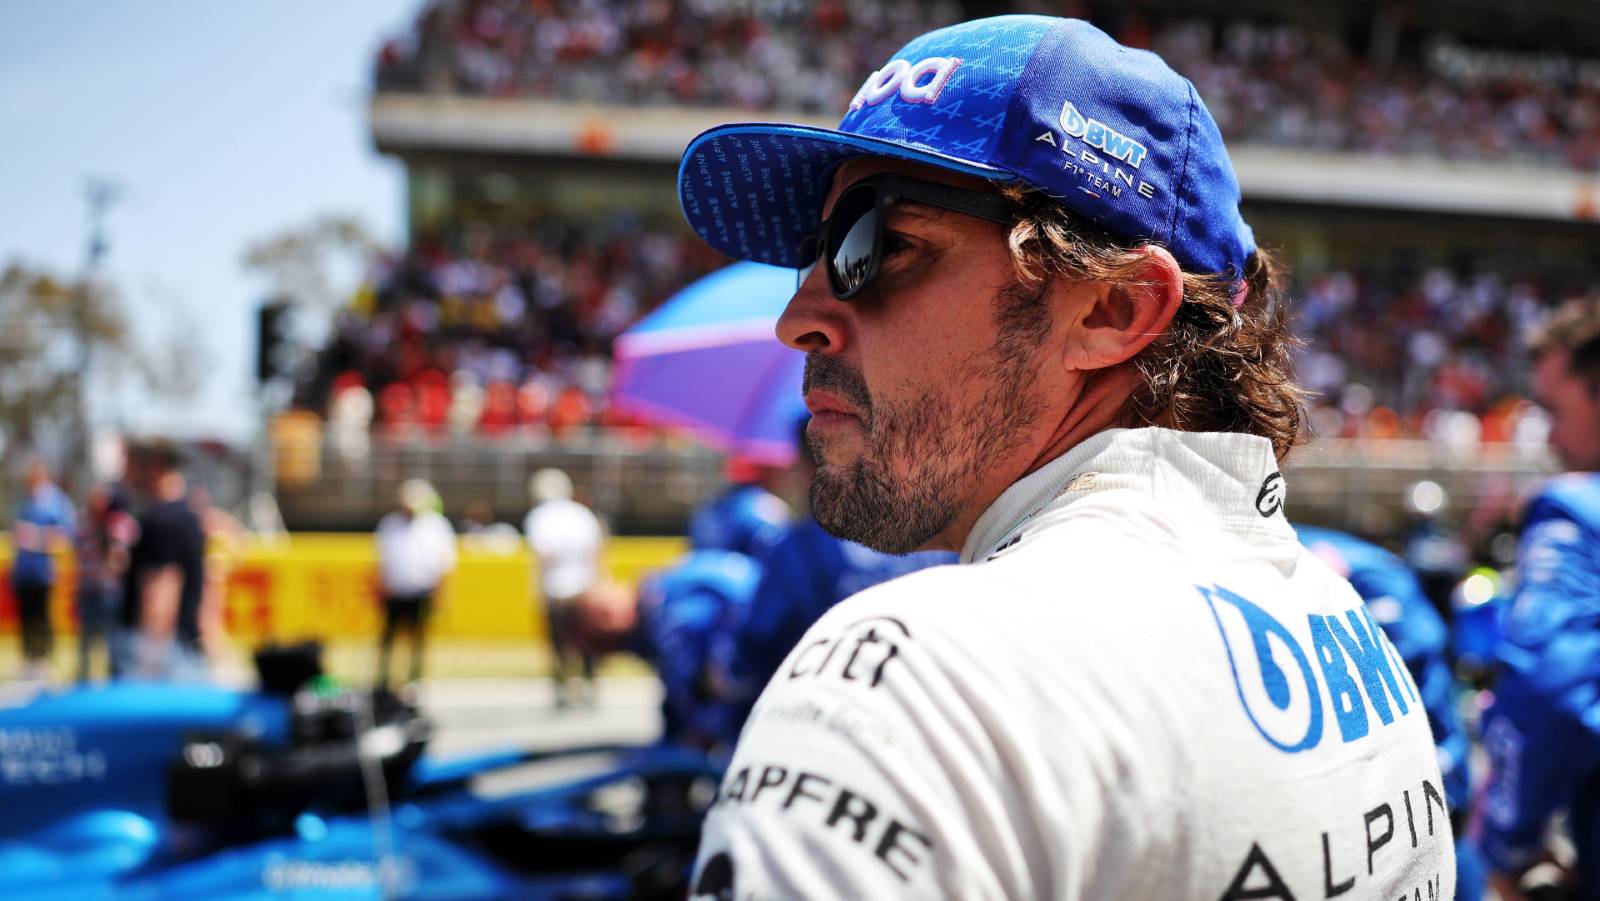 Fernando Alonso on the grid before the Spanish GP. Barcelona May 2022.